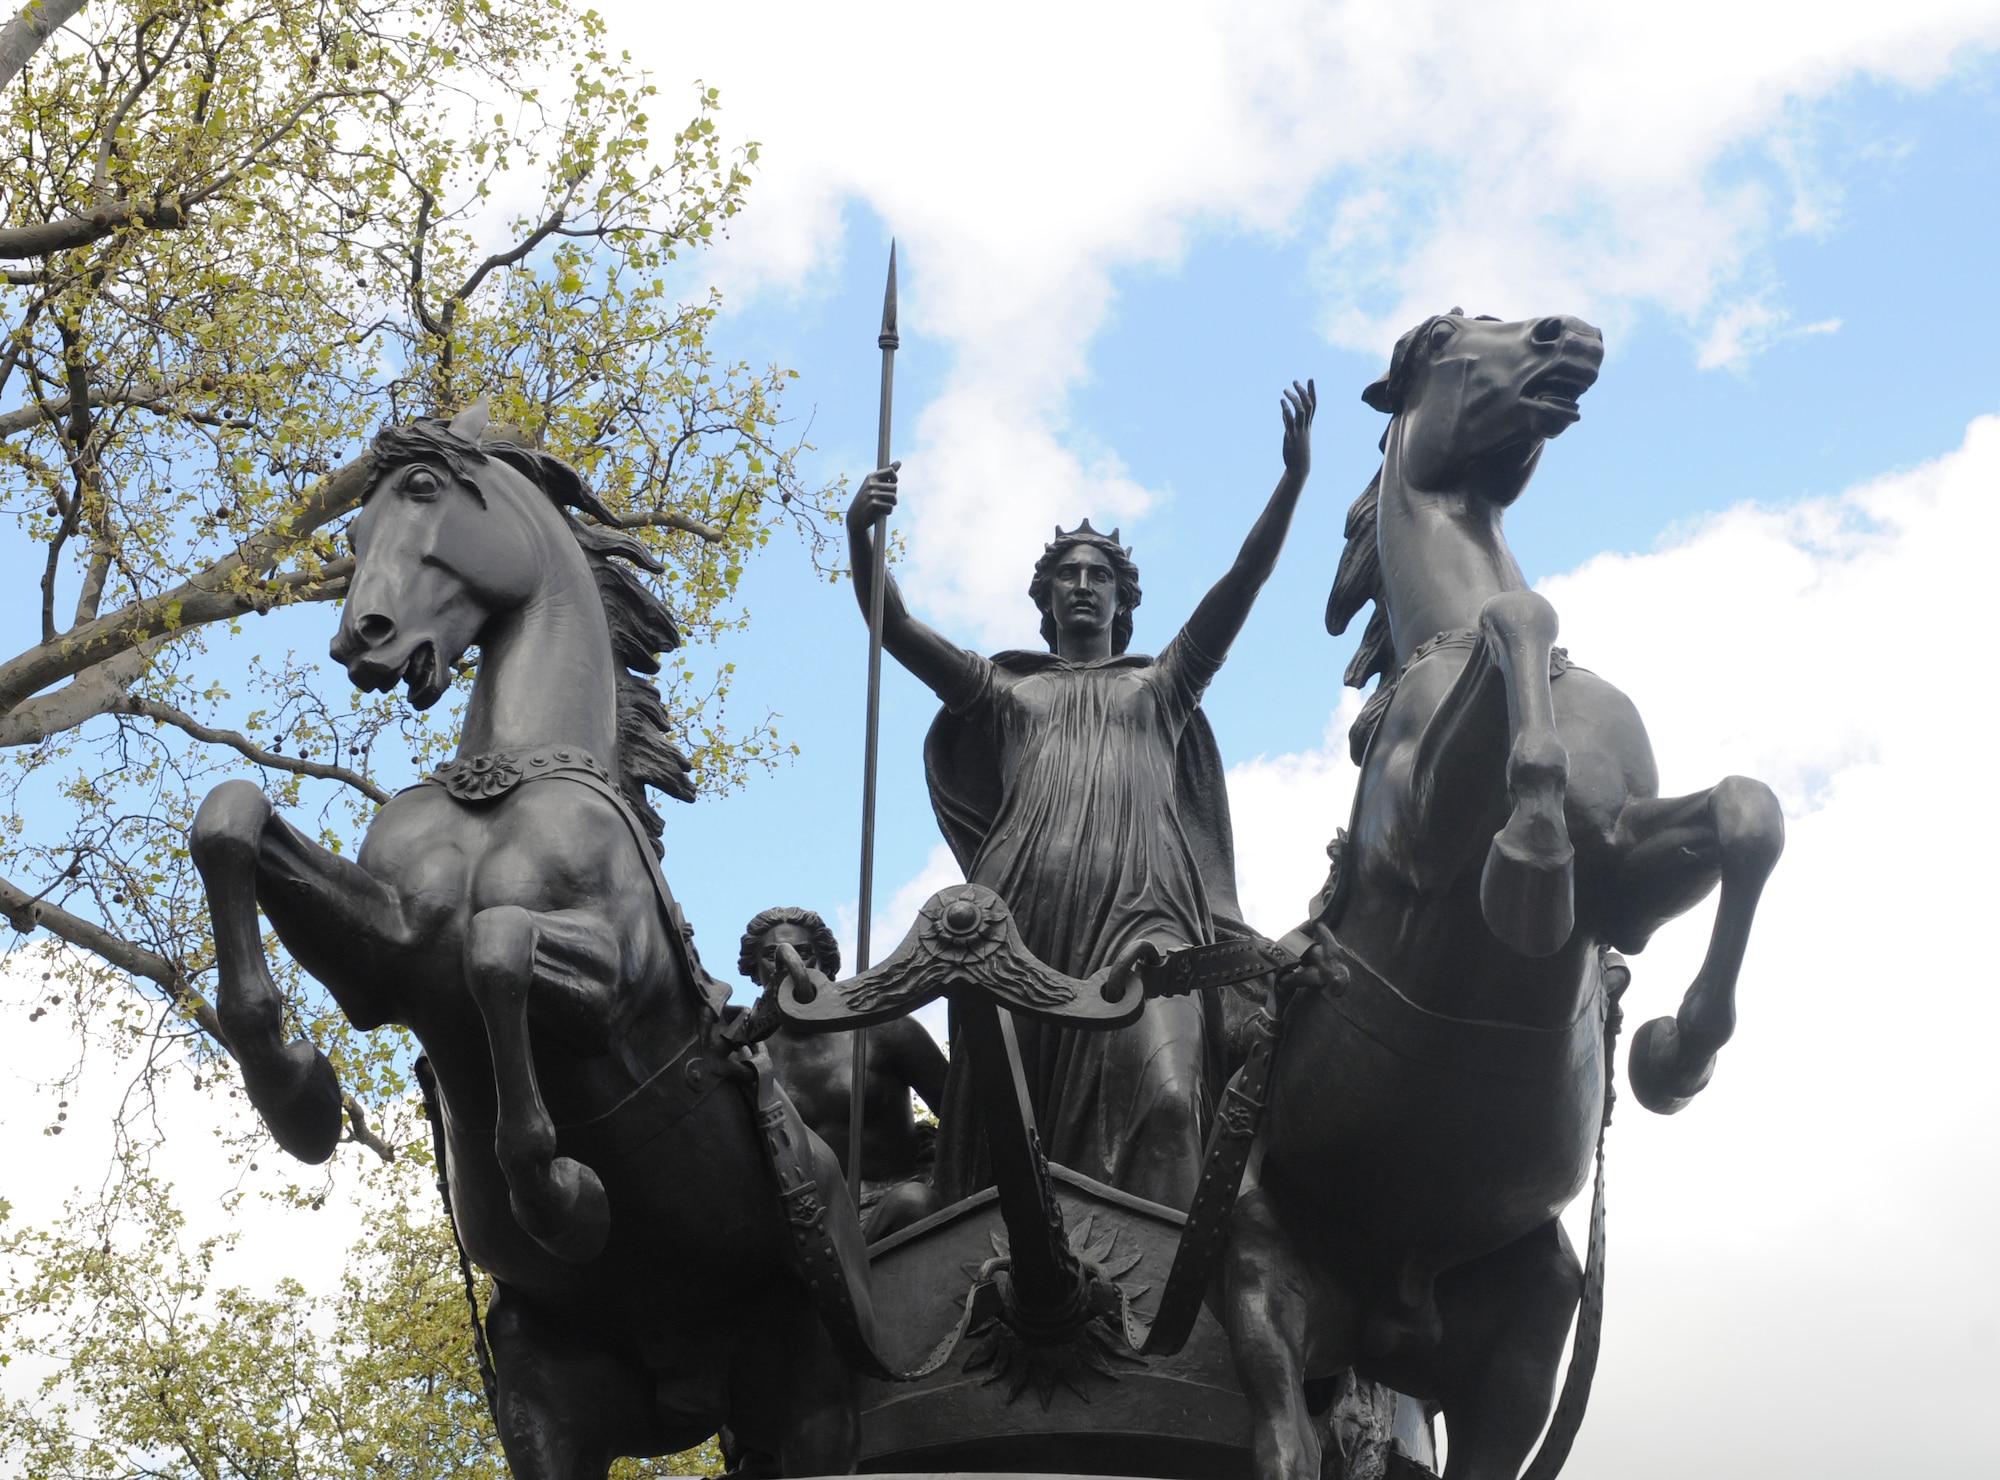 The bronze statue depicting Boudicca , Warrior Queen of the Iceni - mistakenly labeled as 'Boadicea' - was erected in 1902 in London, near Westminster Bridge, on the north bank of the River Thames in the shadow of Big Ben and the Houses of Parliament. Interest in Boudicca was limited until the 19th century, when it was sparked by the fact that 'Boudicca' is the Celtic word for 'victory' - so the Iceni ruler was the very first Queen Victoria. (Photo by Staff Sergeant Nick McNaughton) 
